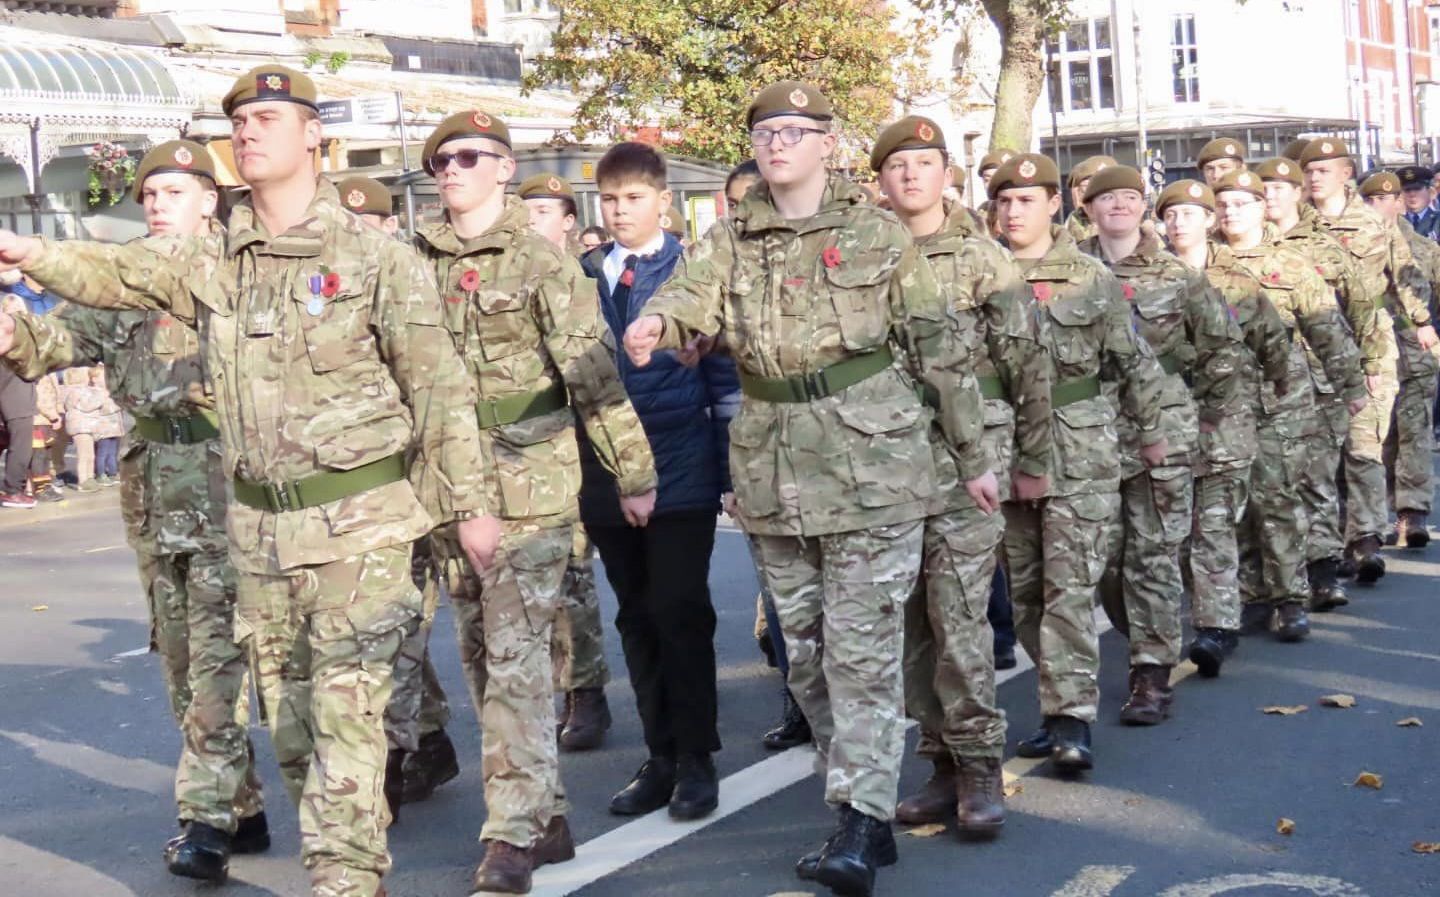 The Remembrance Sunday parade and service in Southport. Photo by Andrew Brown Media